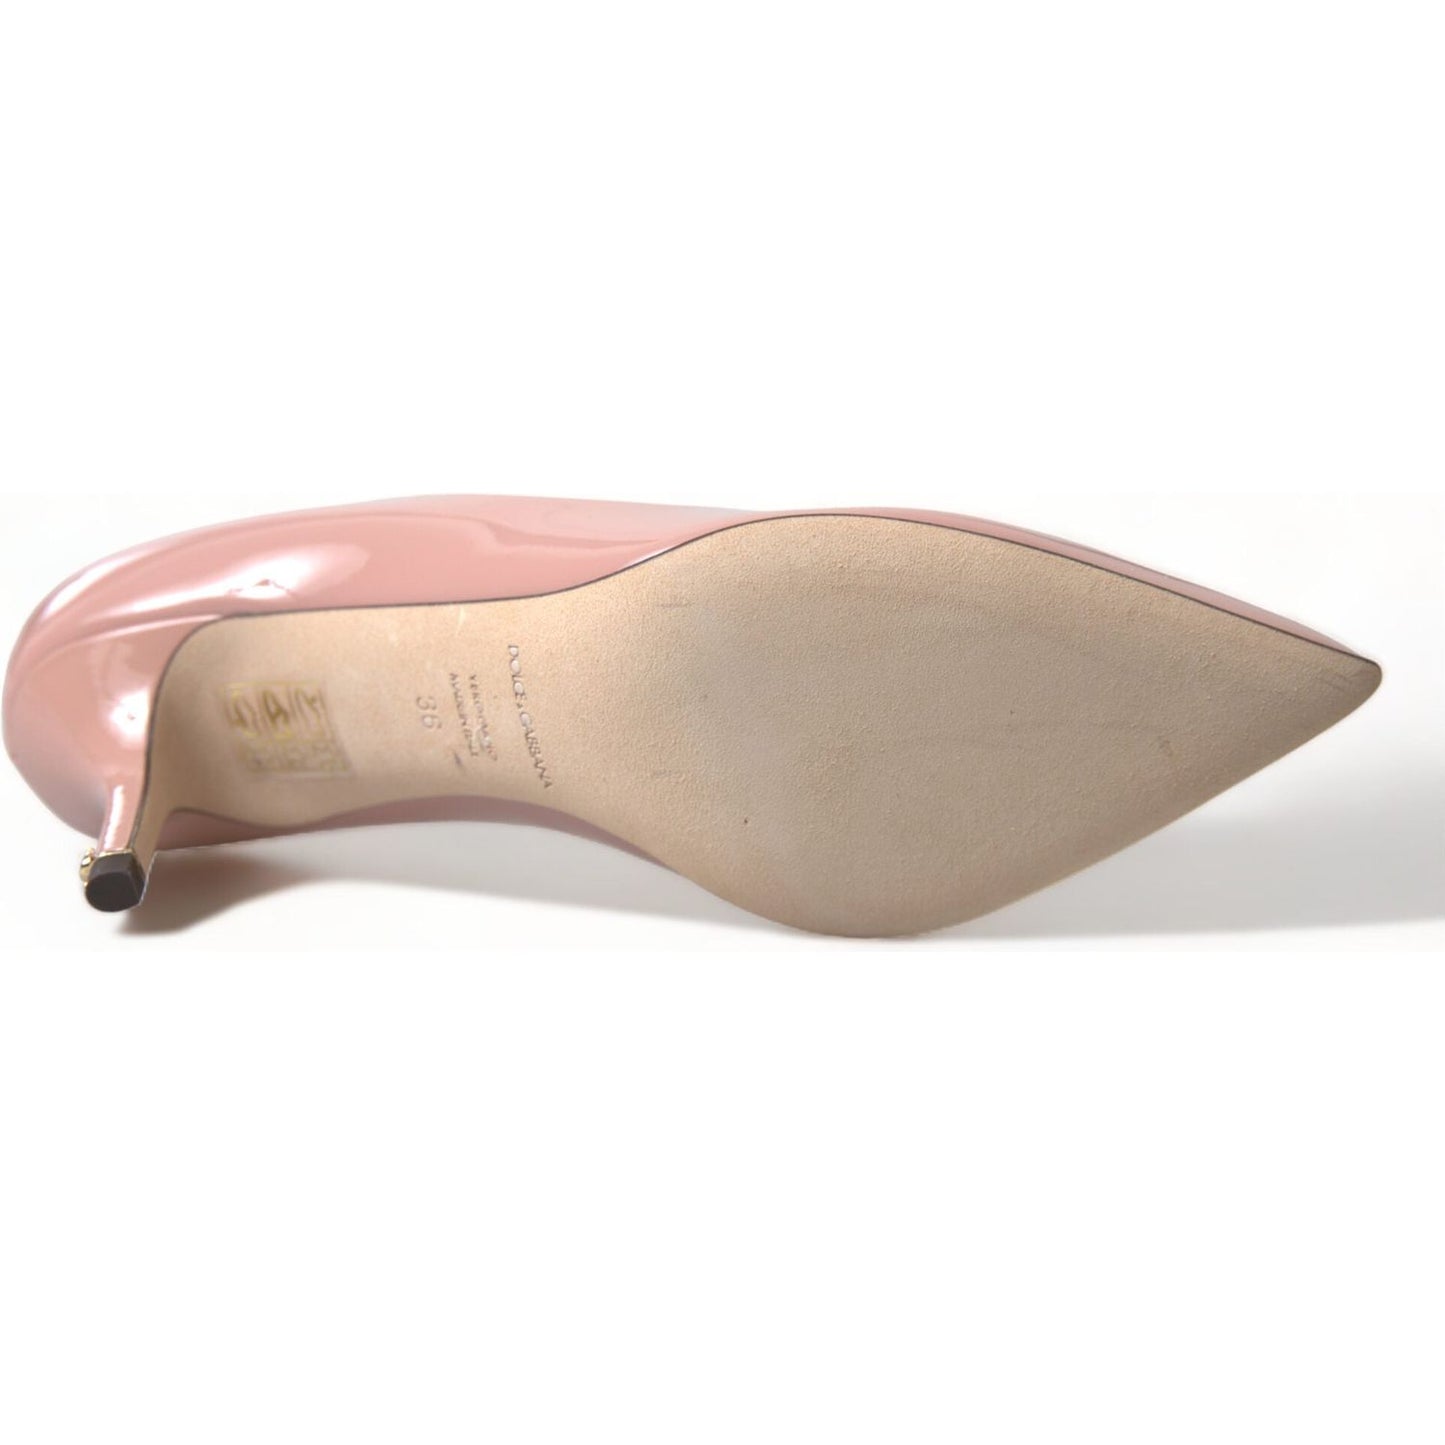 Dolce & Gabbana Pink Patent Stiletto Pumps - Elevate Your Glamour pink-patent-leather-pumps-heels-shoes